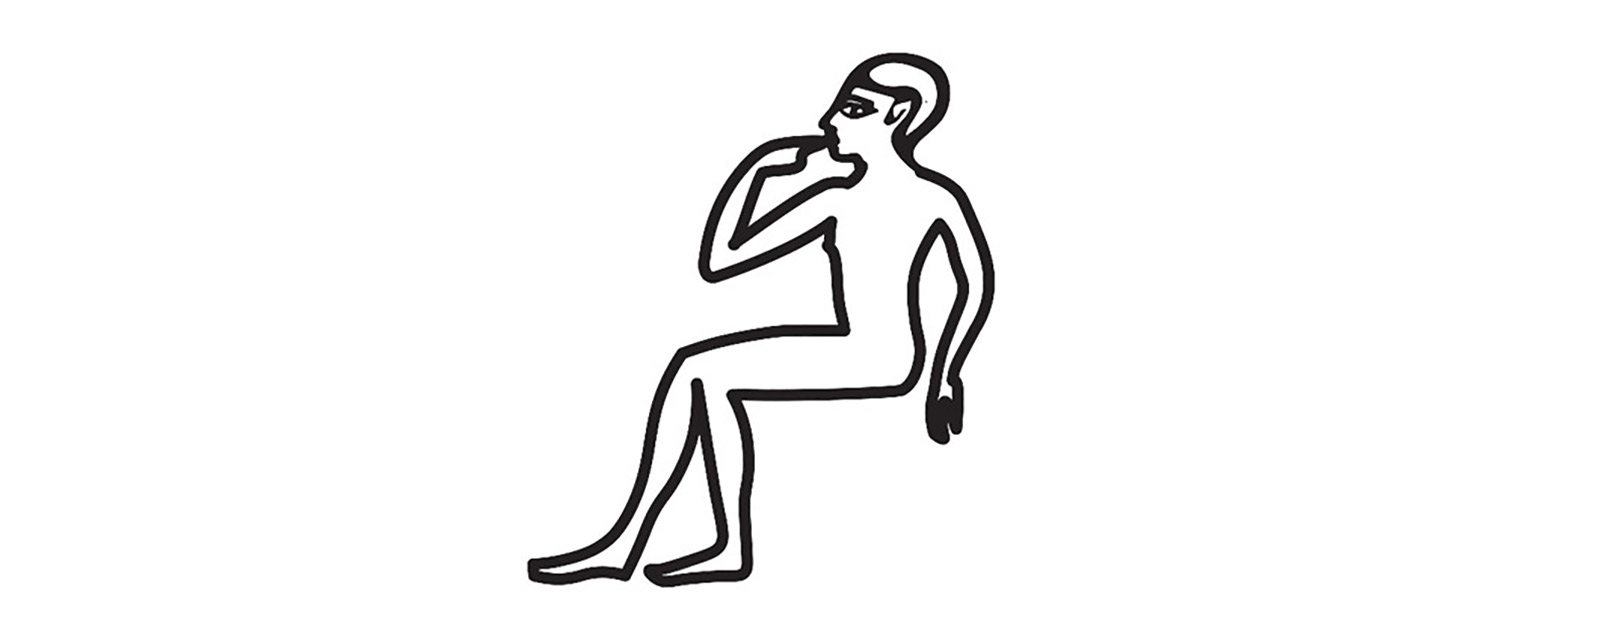 A hieroglyph of a seated figure thinking.